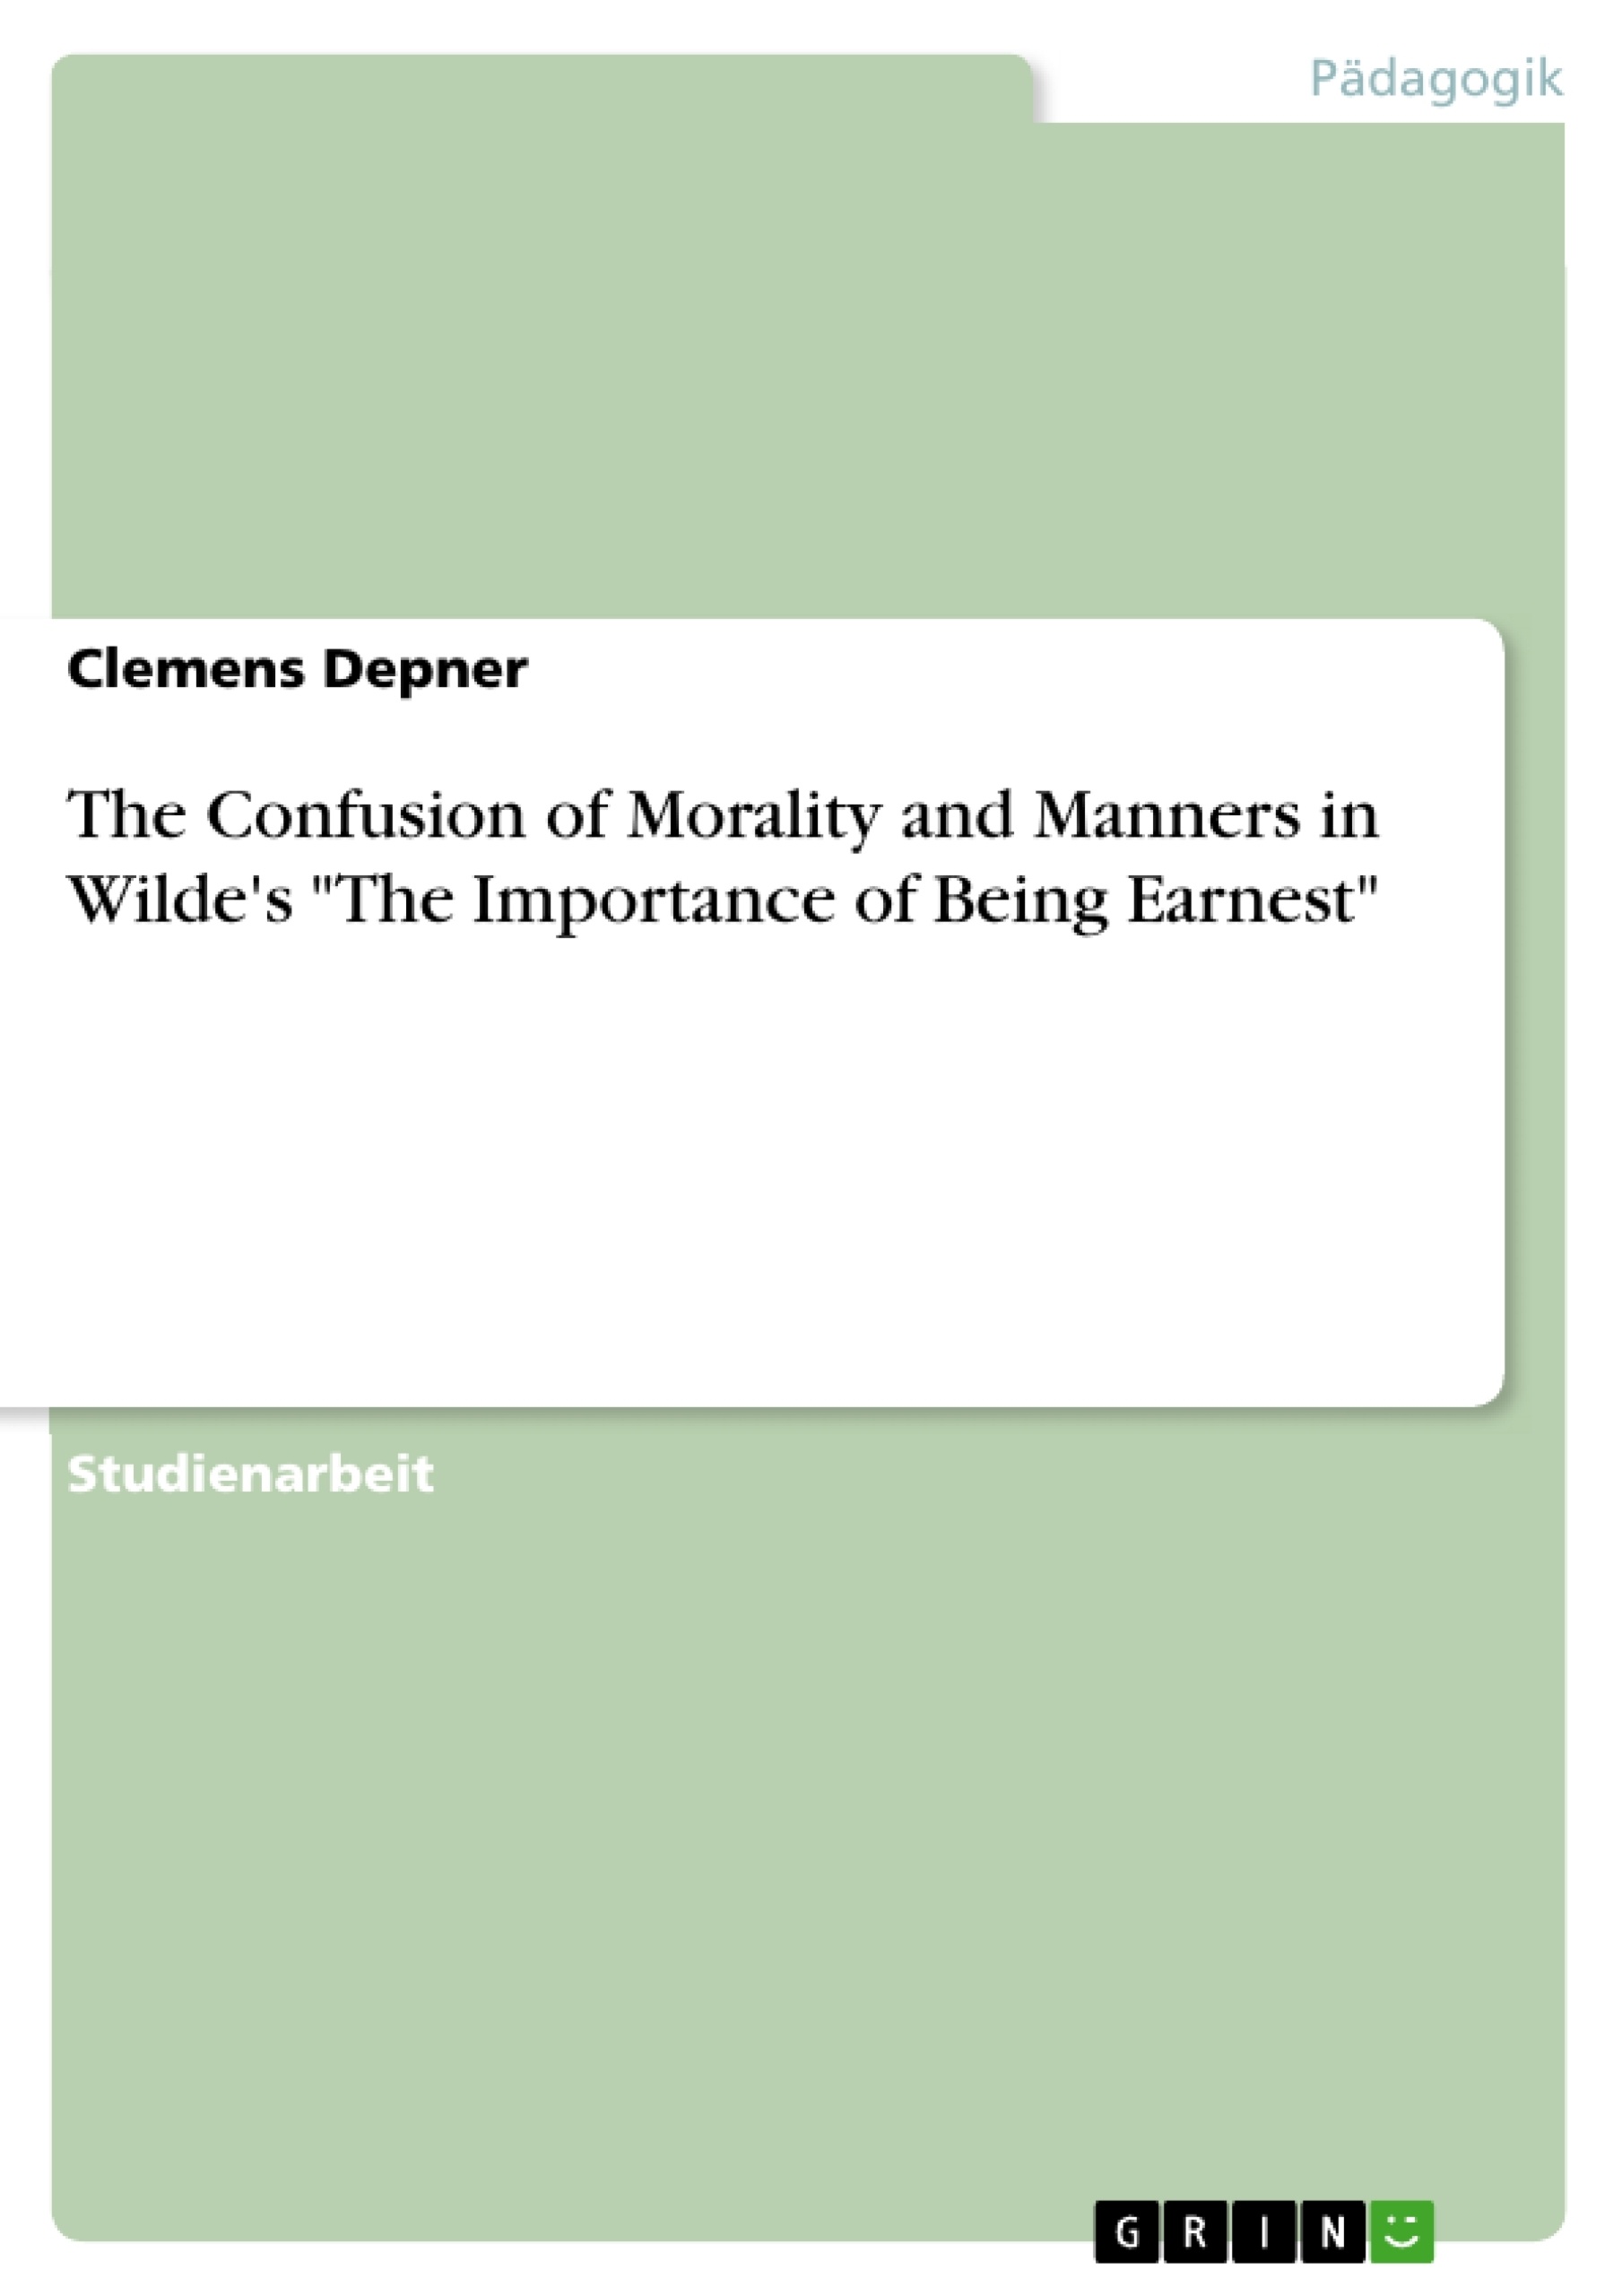 Titel: The Confusion of Morality and Manners in Wilde's "The Importance of Being Earnest"